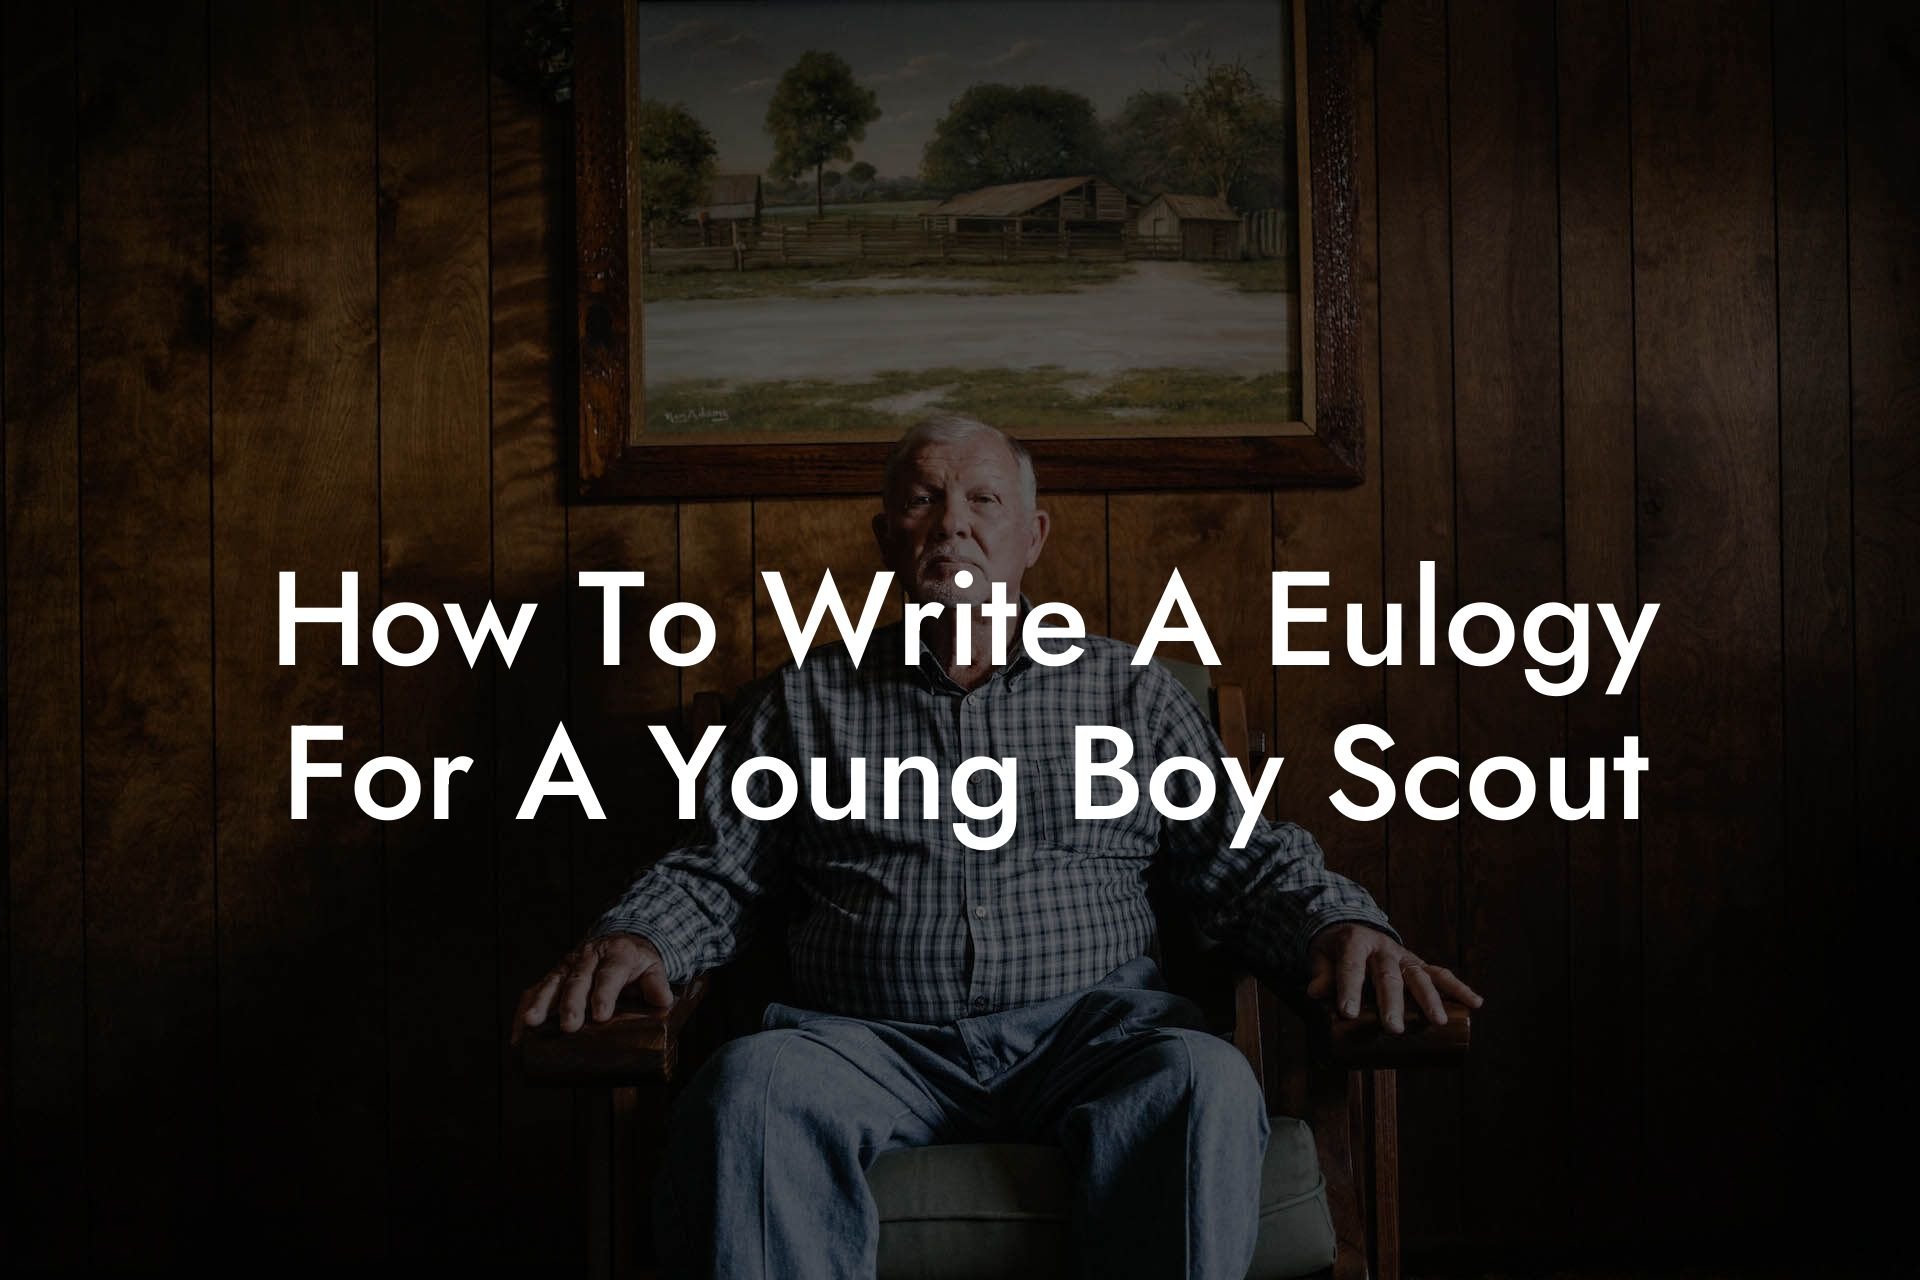 How To Write A Eulogy For A Young Boy Scout